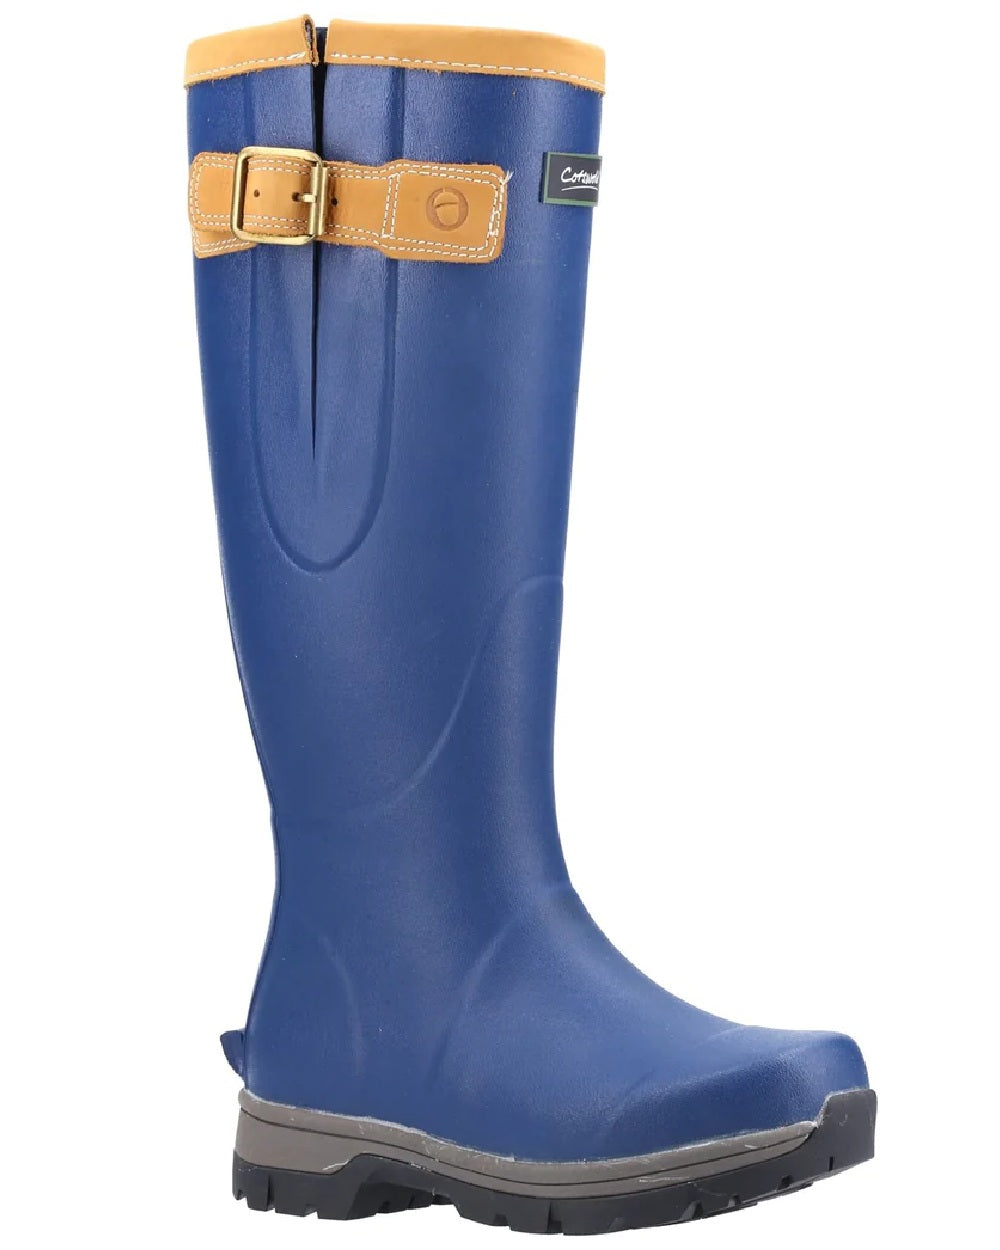 Blue coloured Cotswold Stratus Wellingtons on white background 